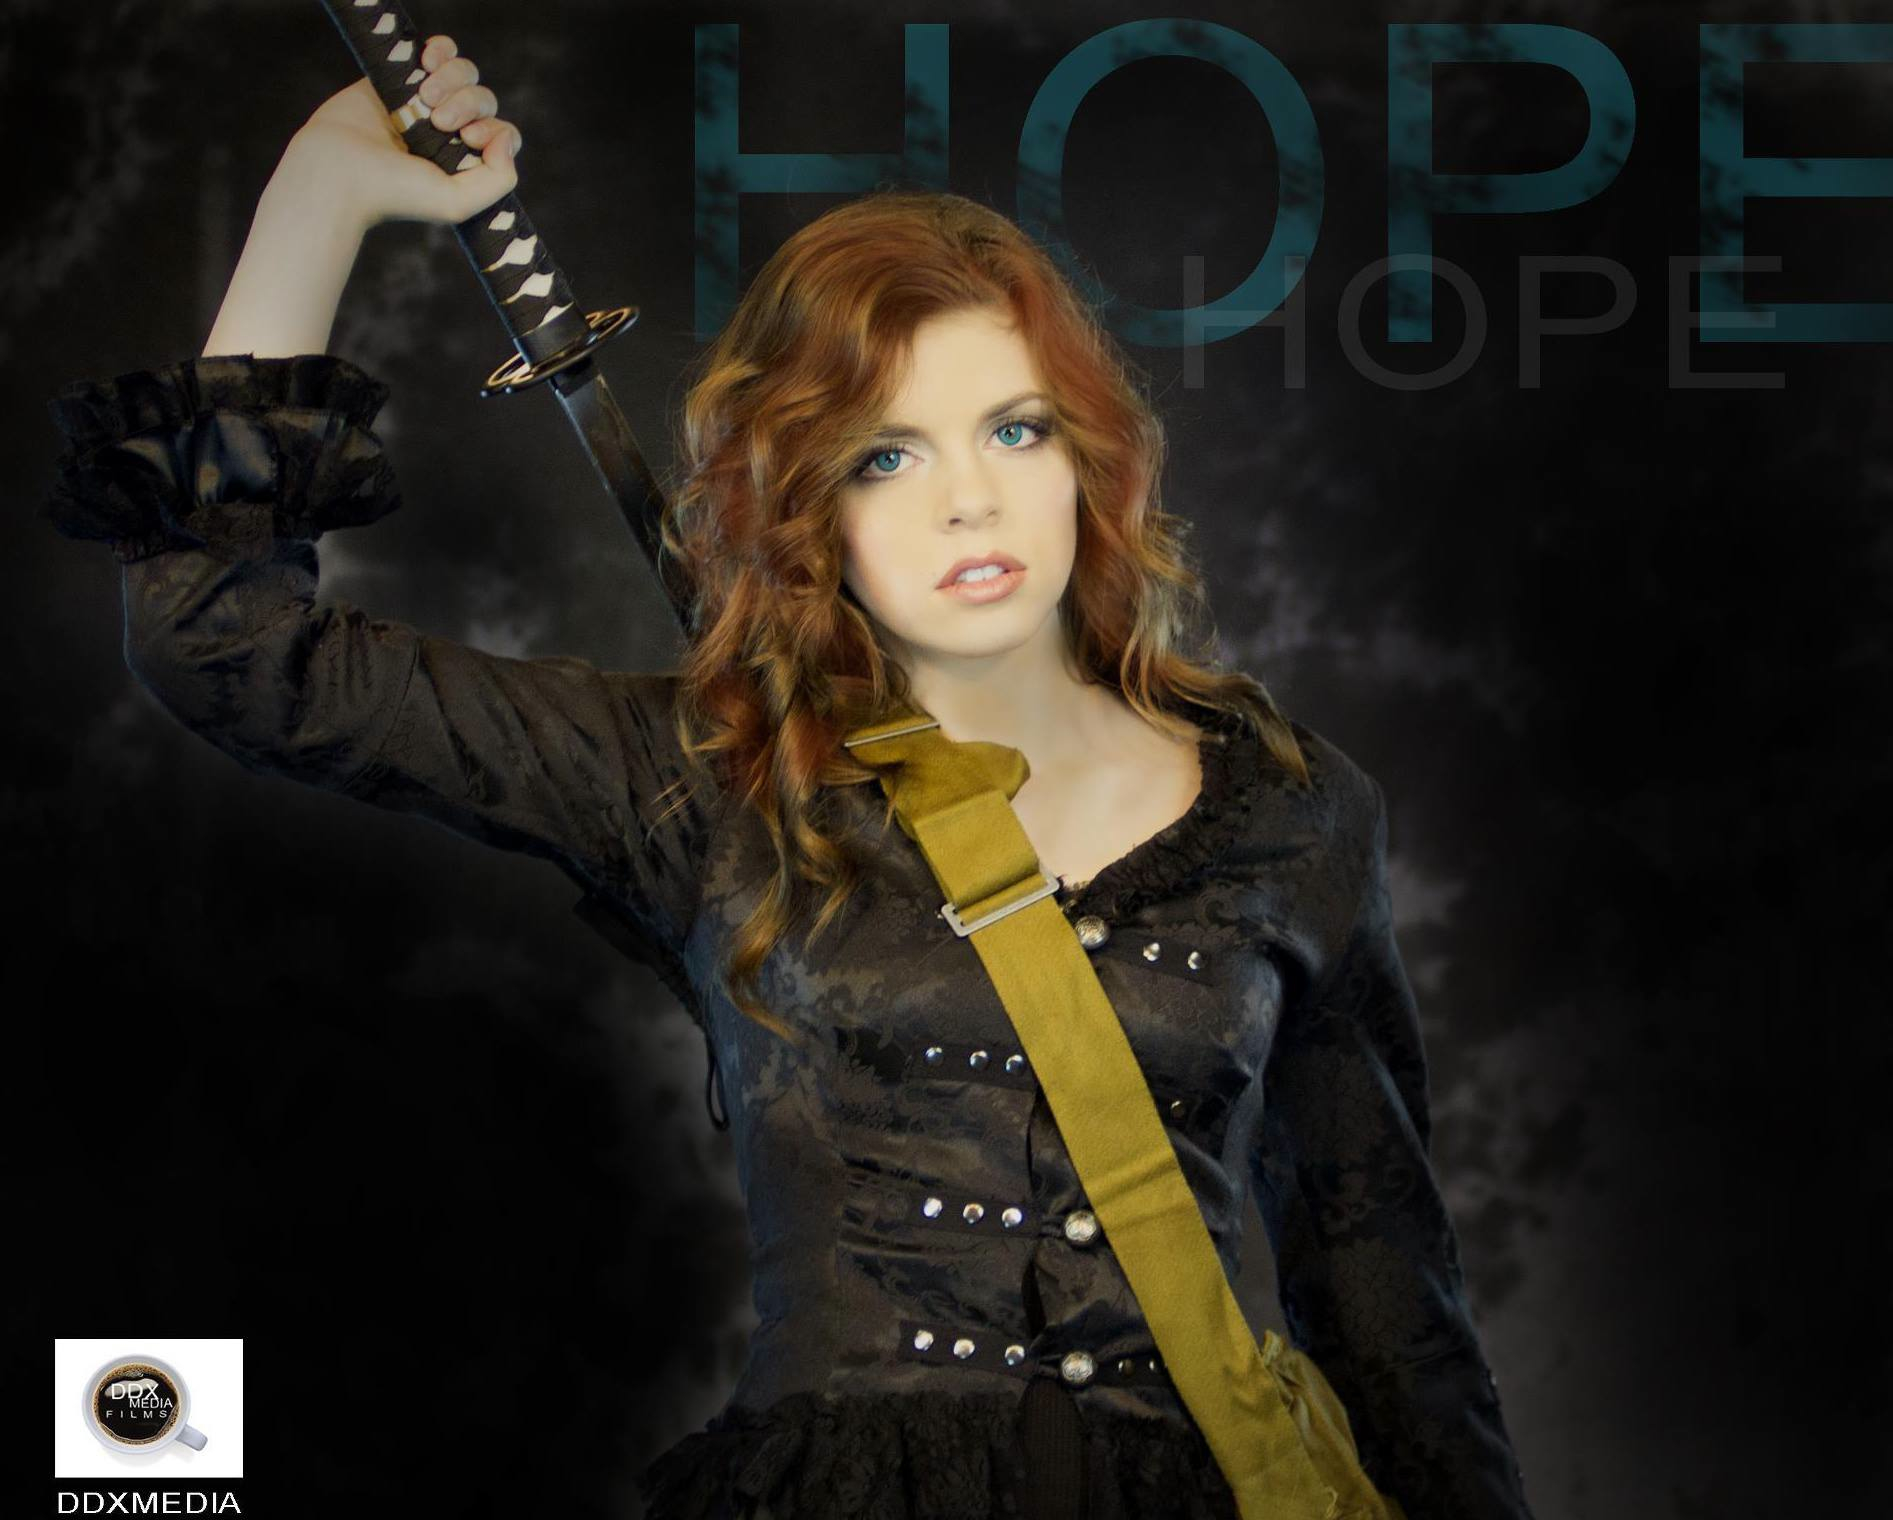 Promo for feature film Hope due to be released fall 2014